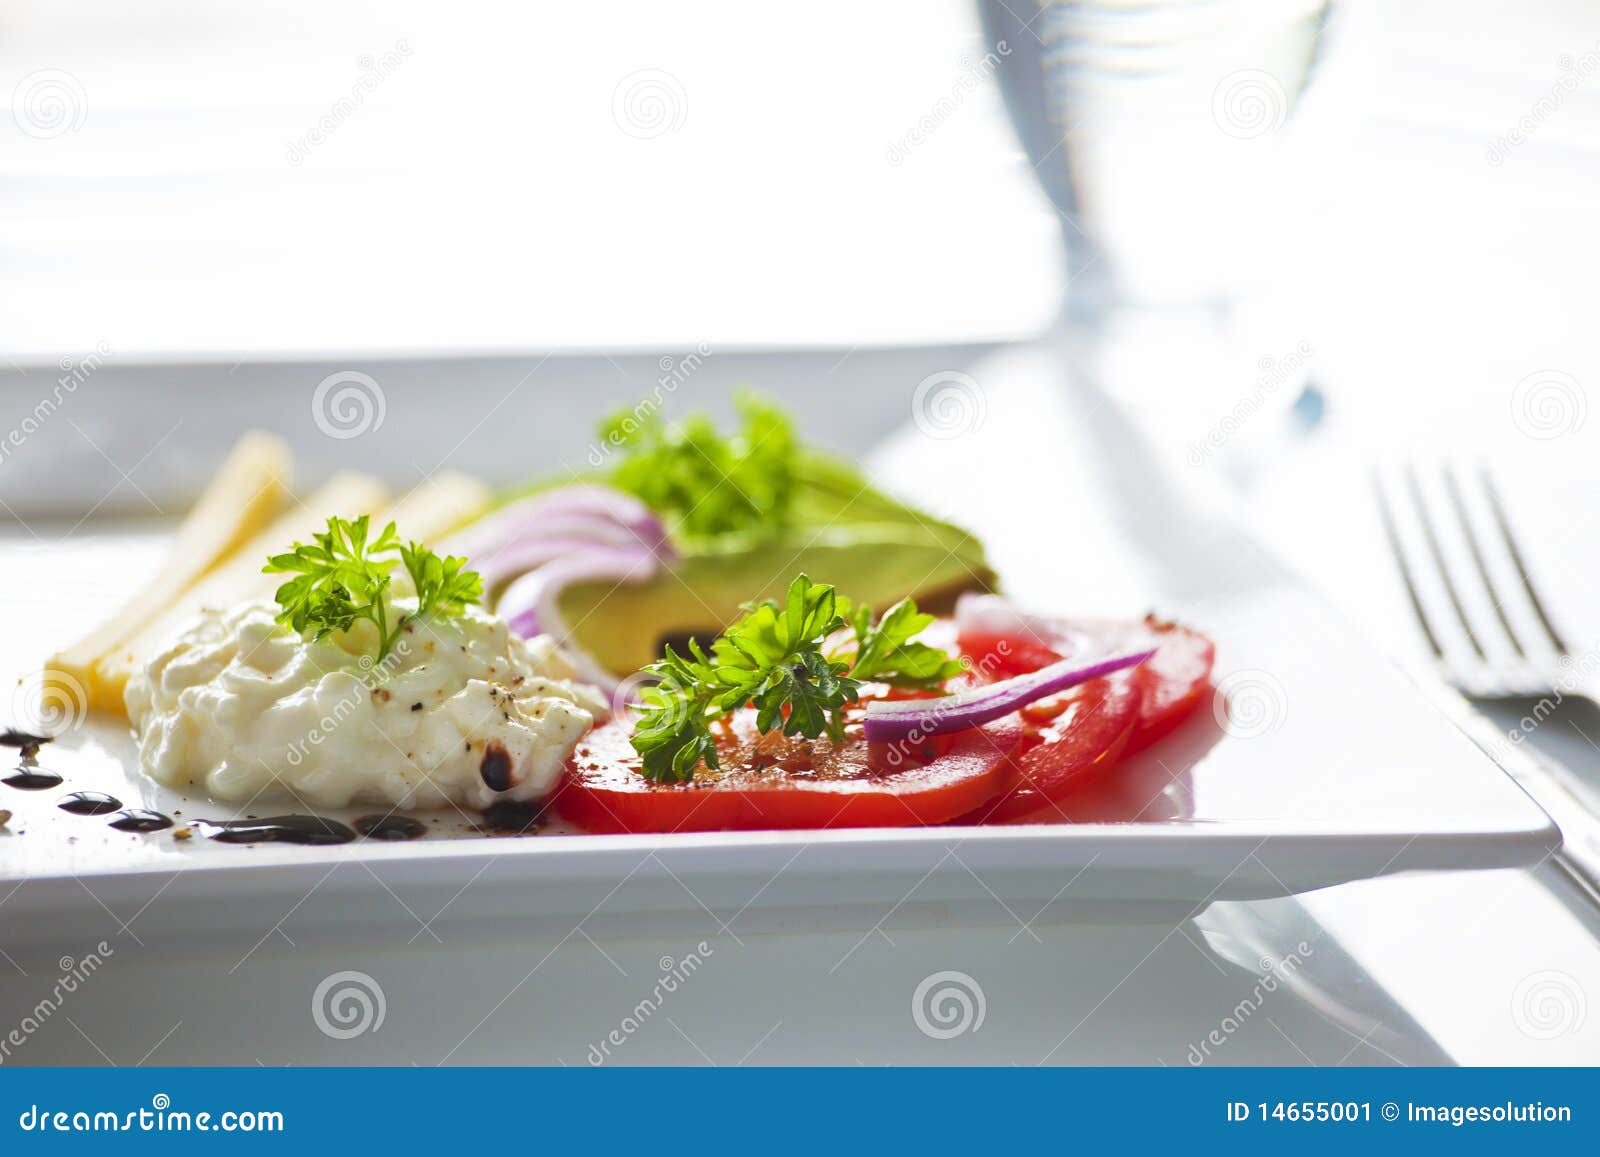 Diet lunch stock image. Image of texture, meal, restaurant - 14655001